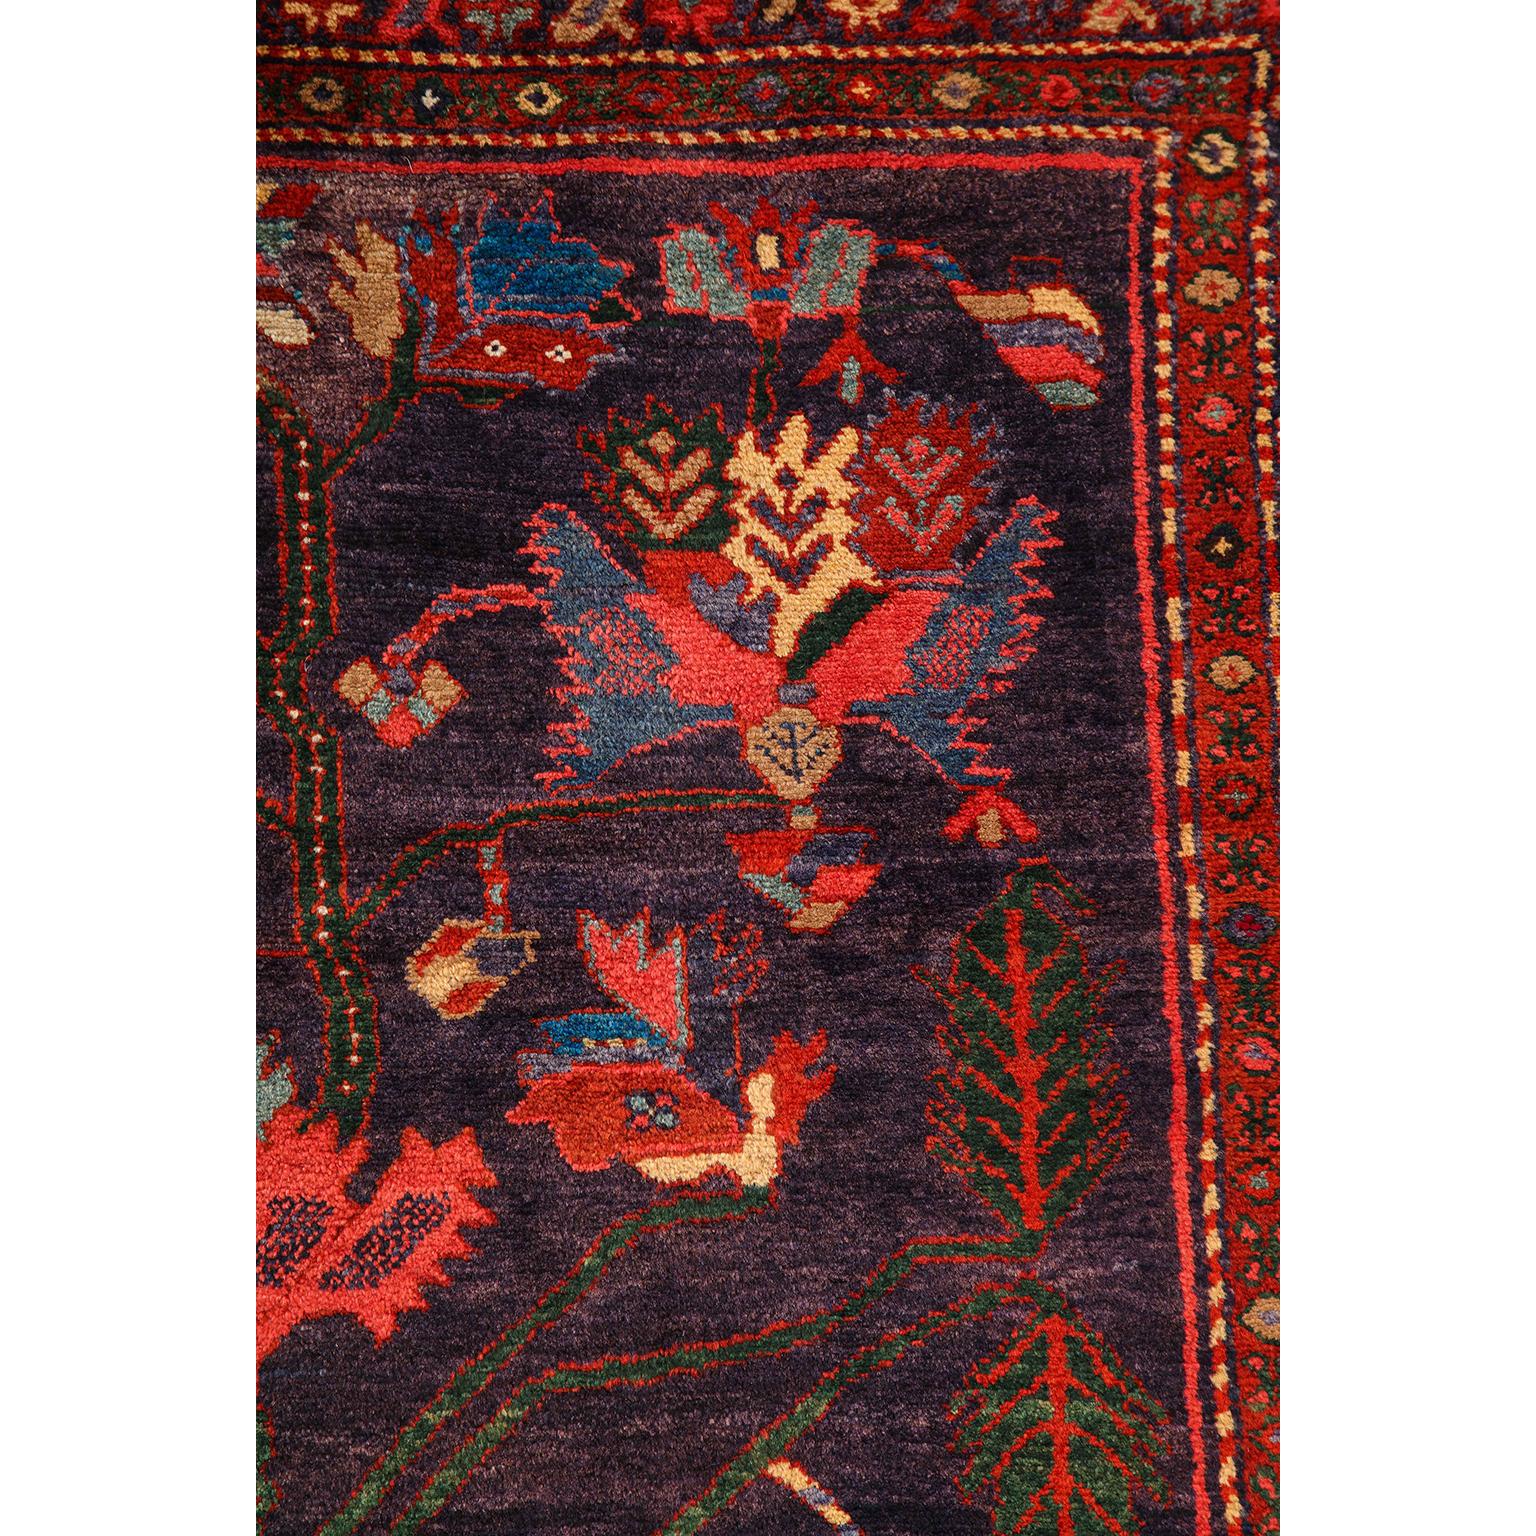 Antique 1910s Saveh Tree of Life Persian Rug, 5' x 7' For Sale 1